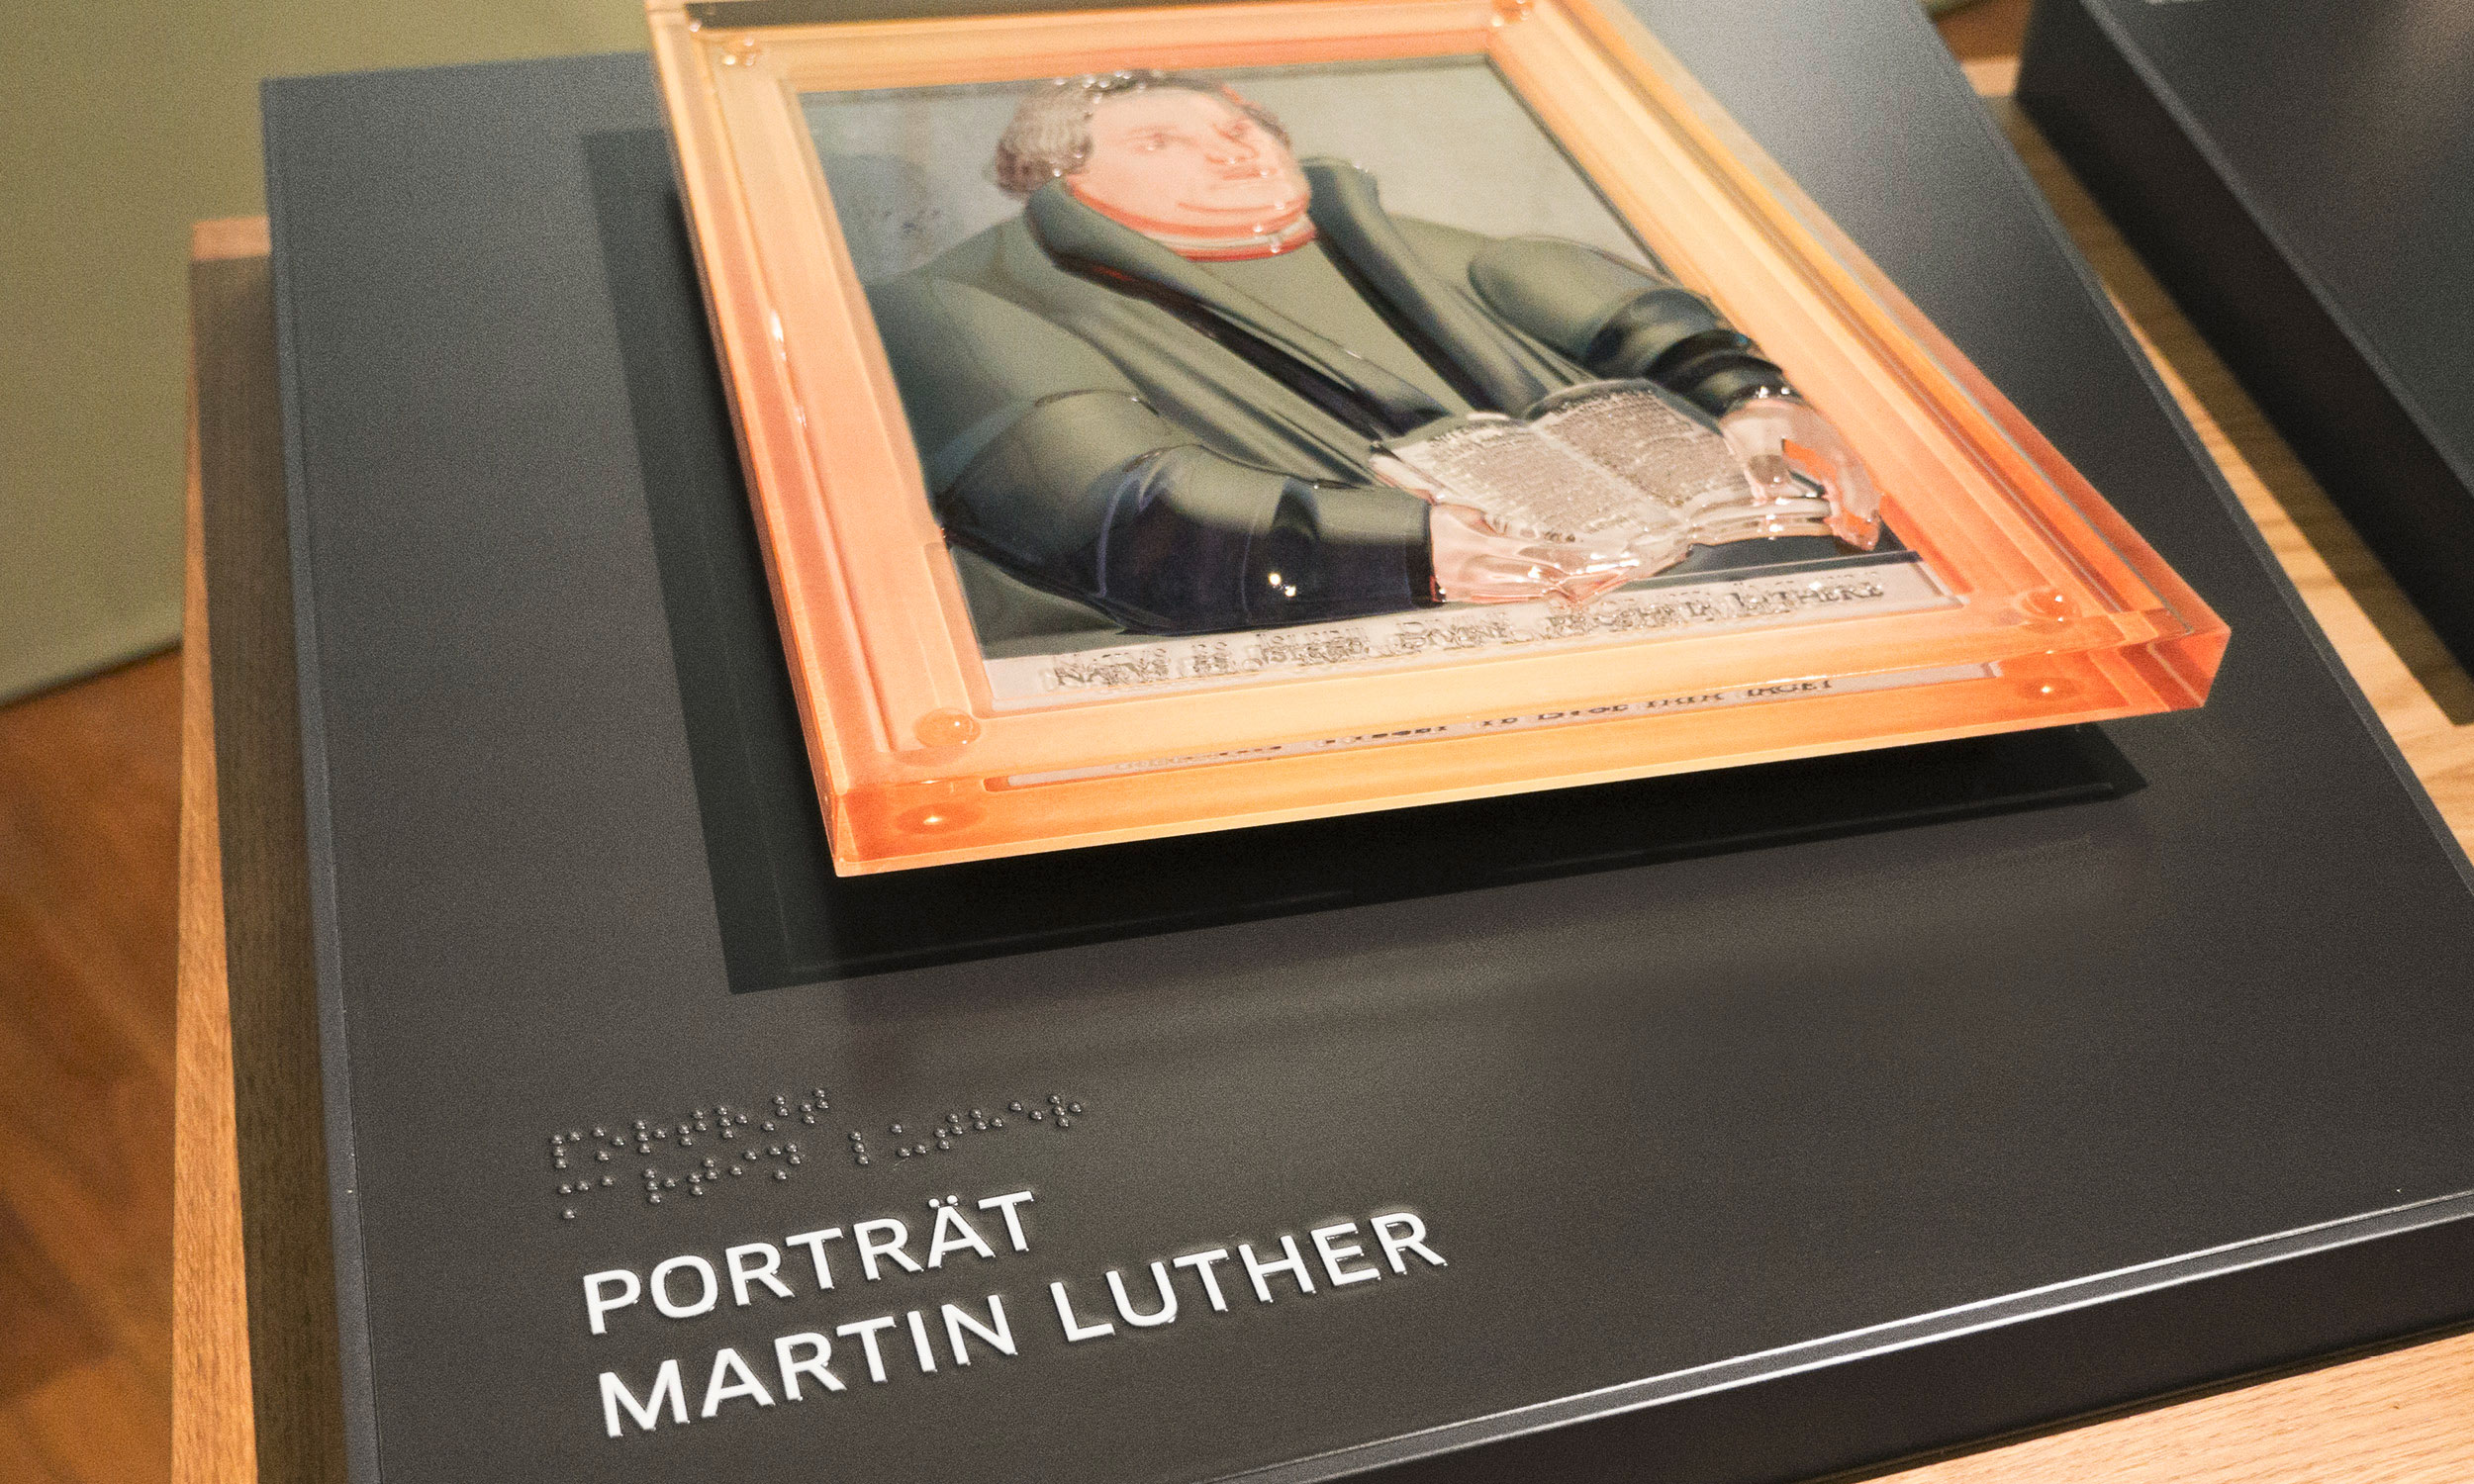 Detail photo of the tactile station with the rotating Luther painting on a plate with inscriptions in Braille and profile lettering